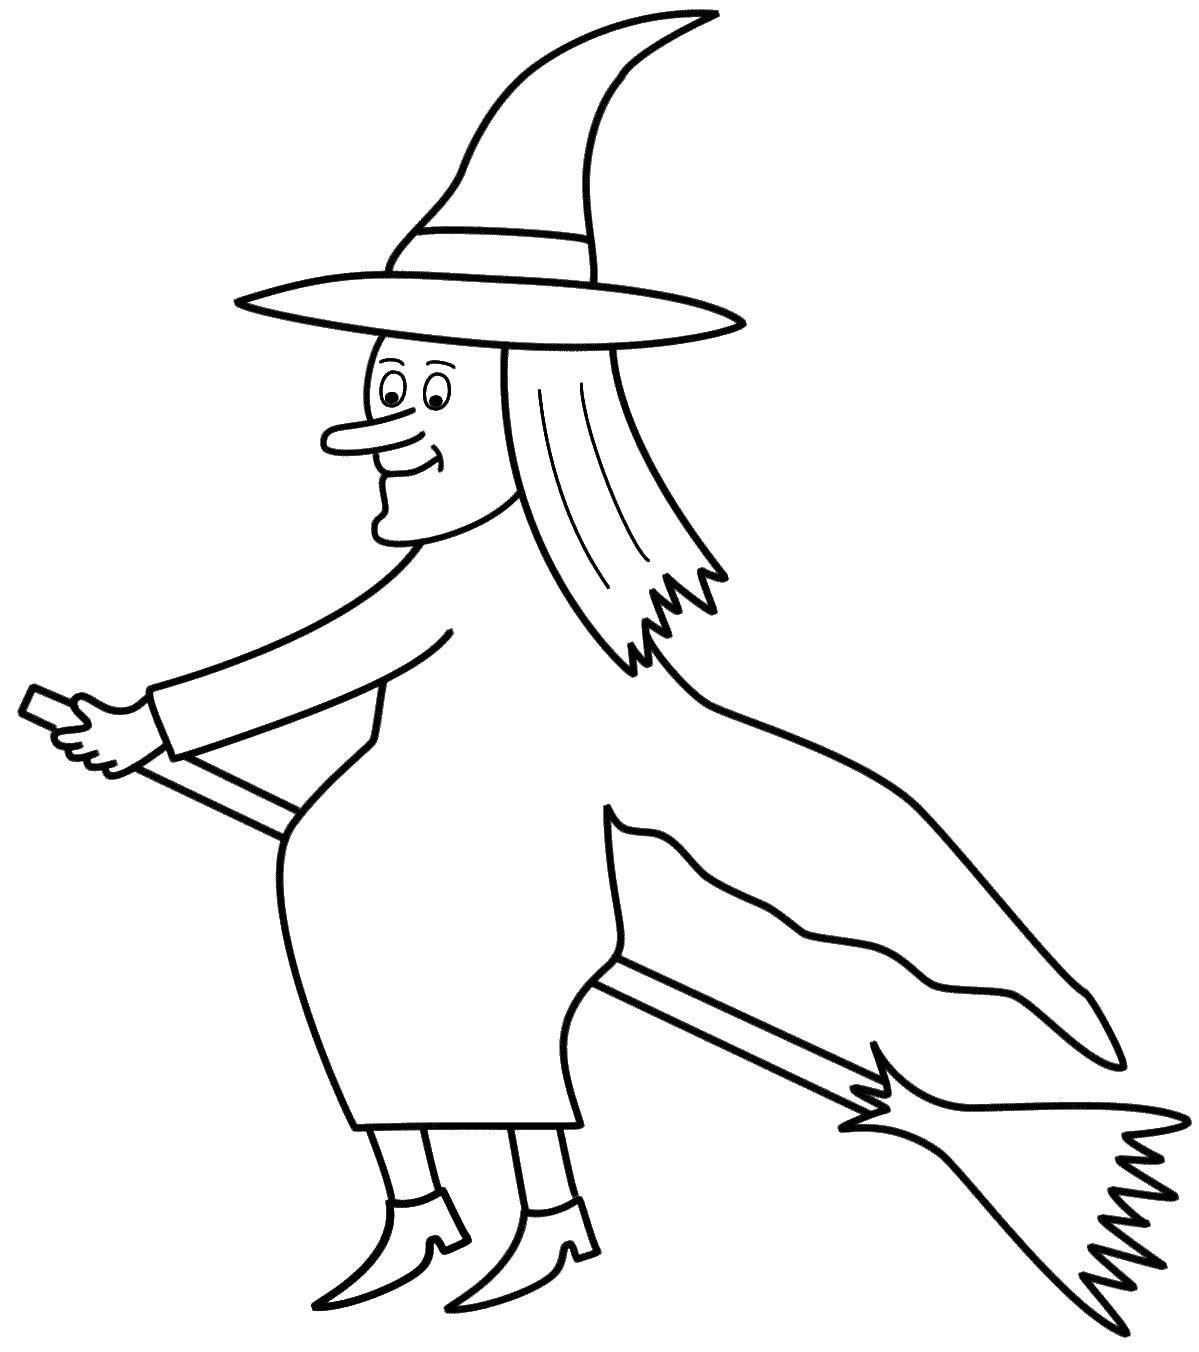 Coloring Witch on a broom. Category witch. Tags:  that old woman, witch, broom.